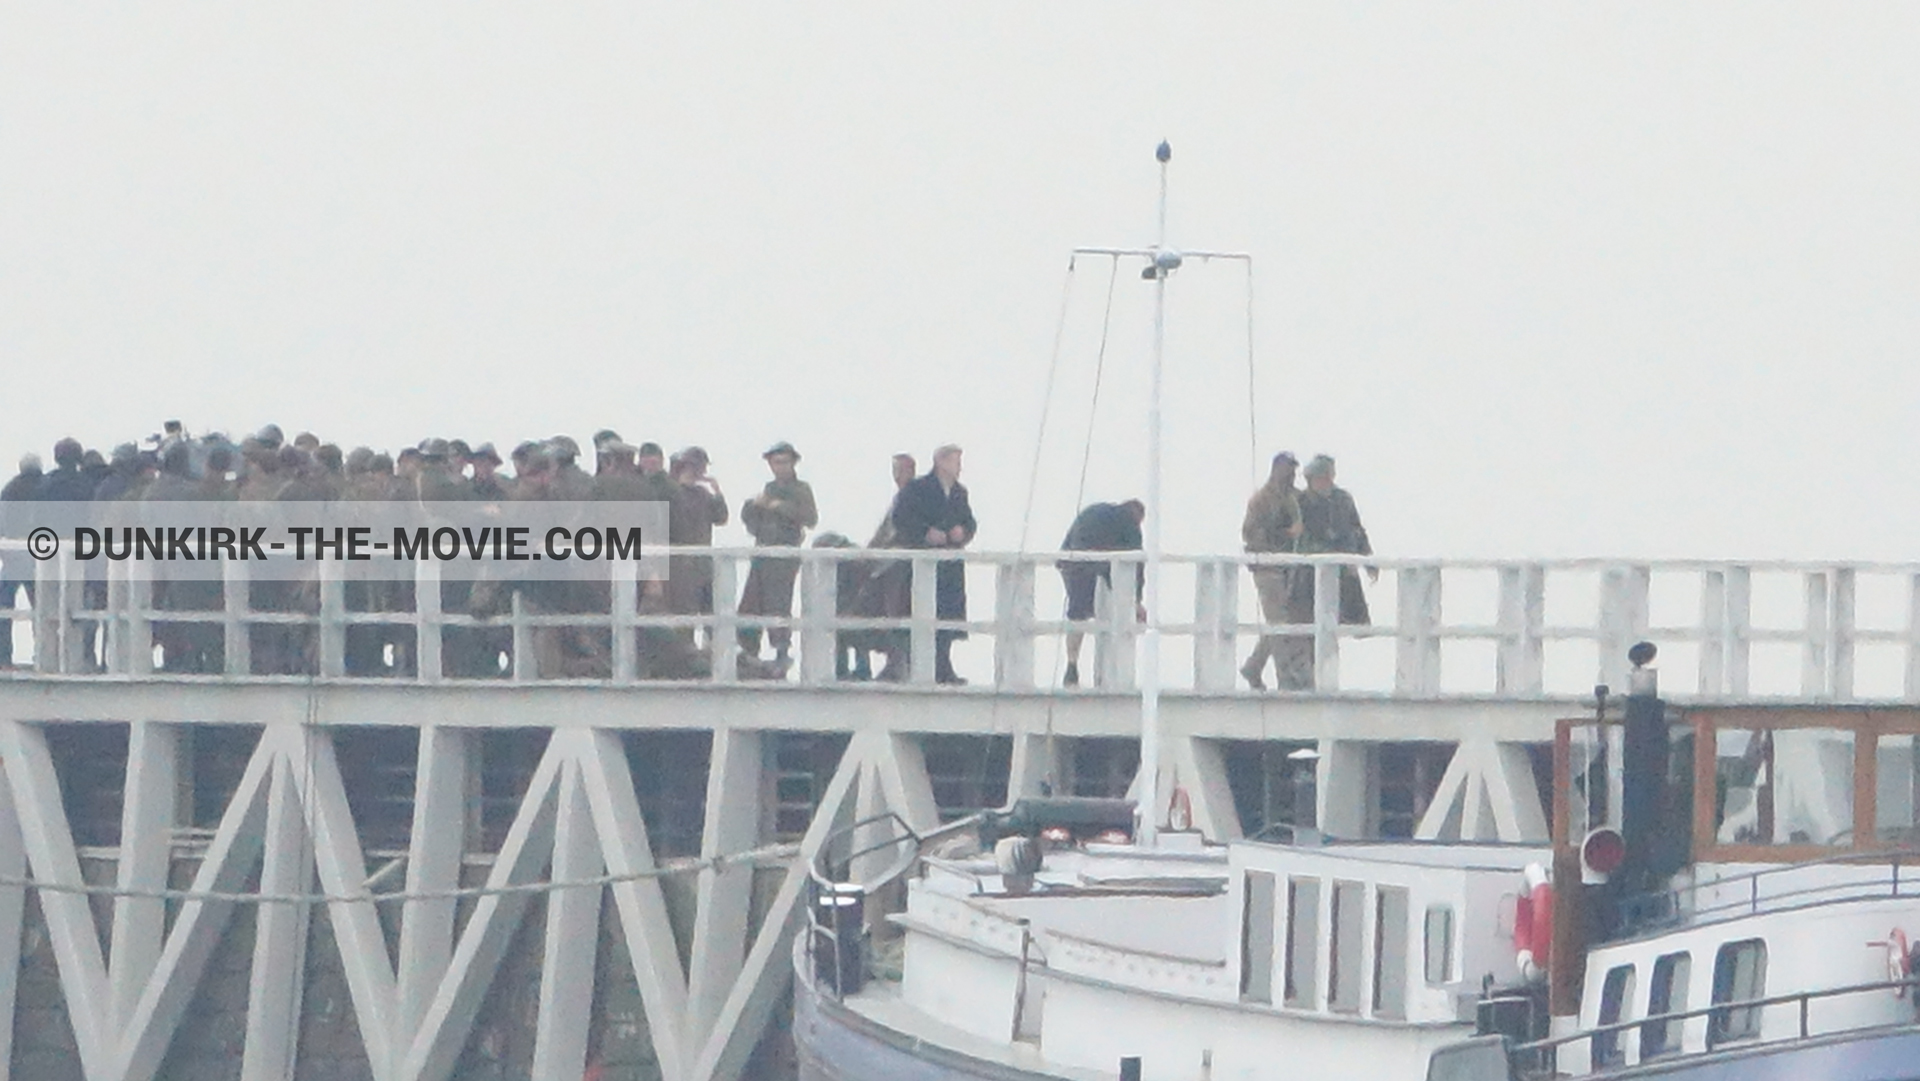 Picture with boat, grey sky, supernumeraries, EST pier,  from behind the scene of the Dunkirk movie by Nolan